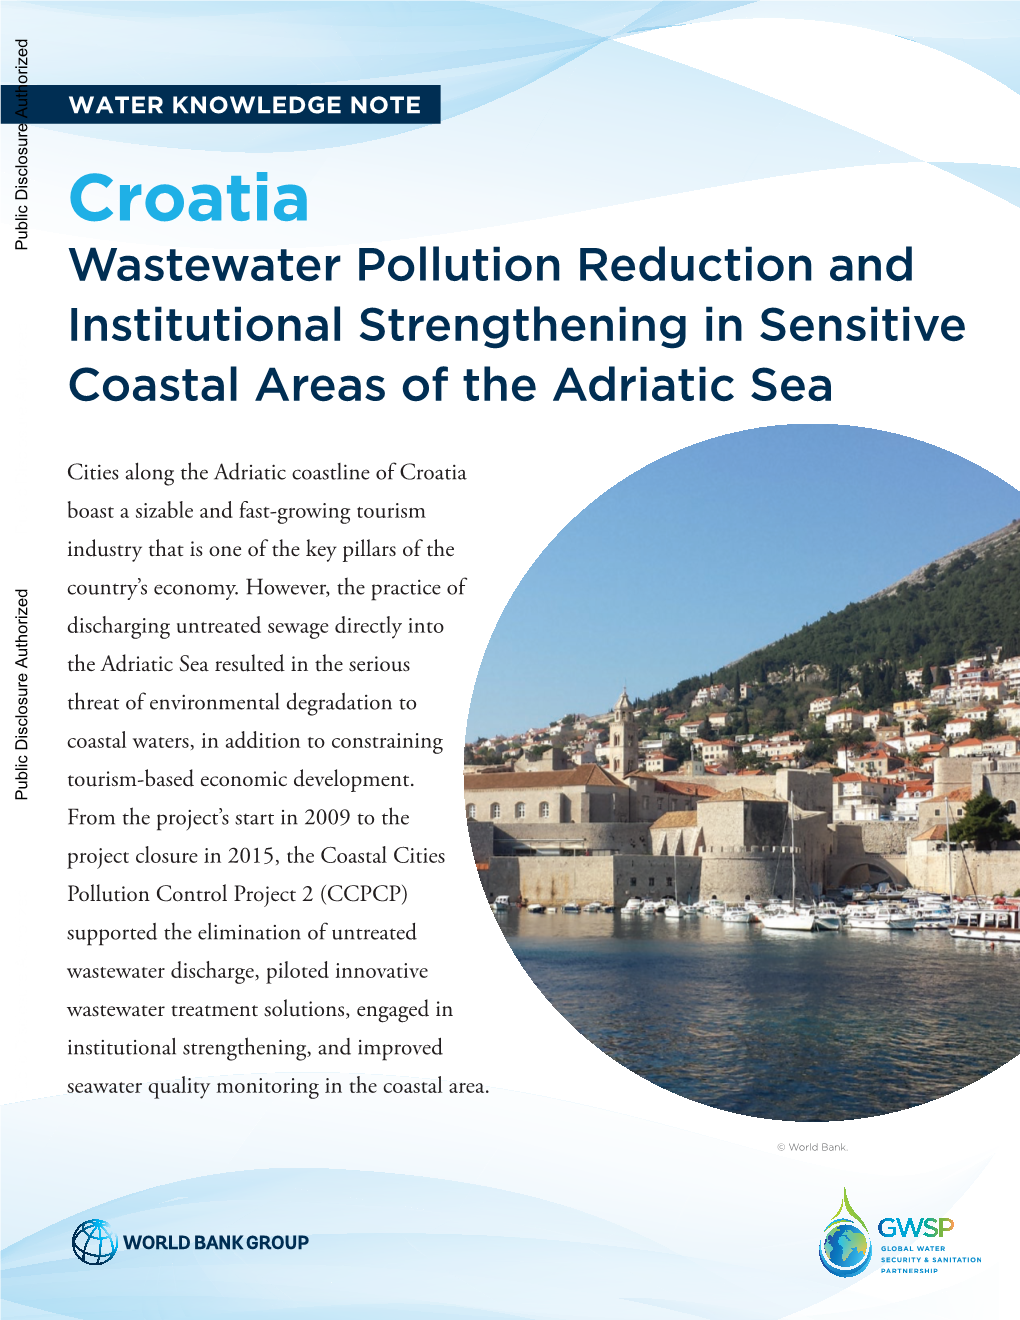 Croatia Public Disclosure Authorized Wastewater Pollution Reduction and Institutional Strengthening in Sensitive Coastal Areas of the Adriatic Sea